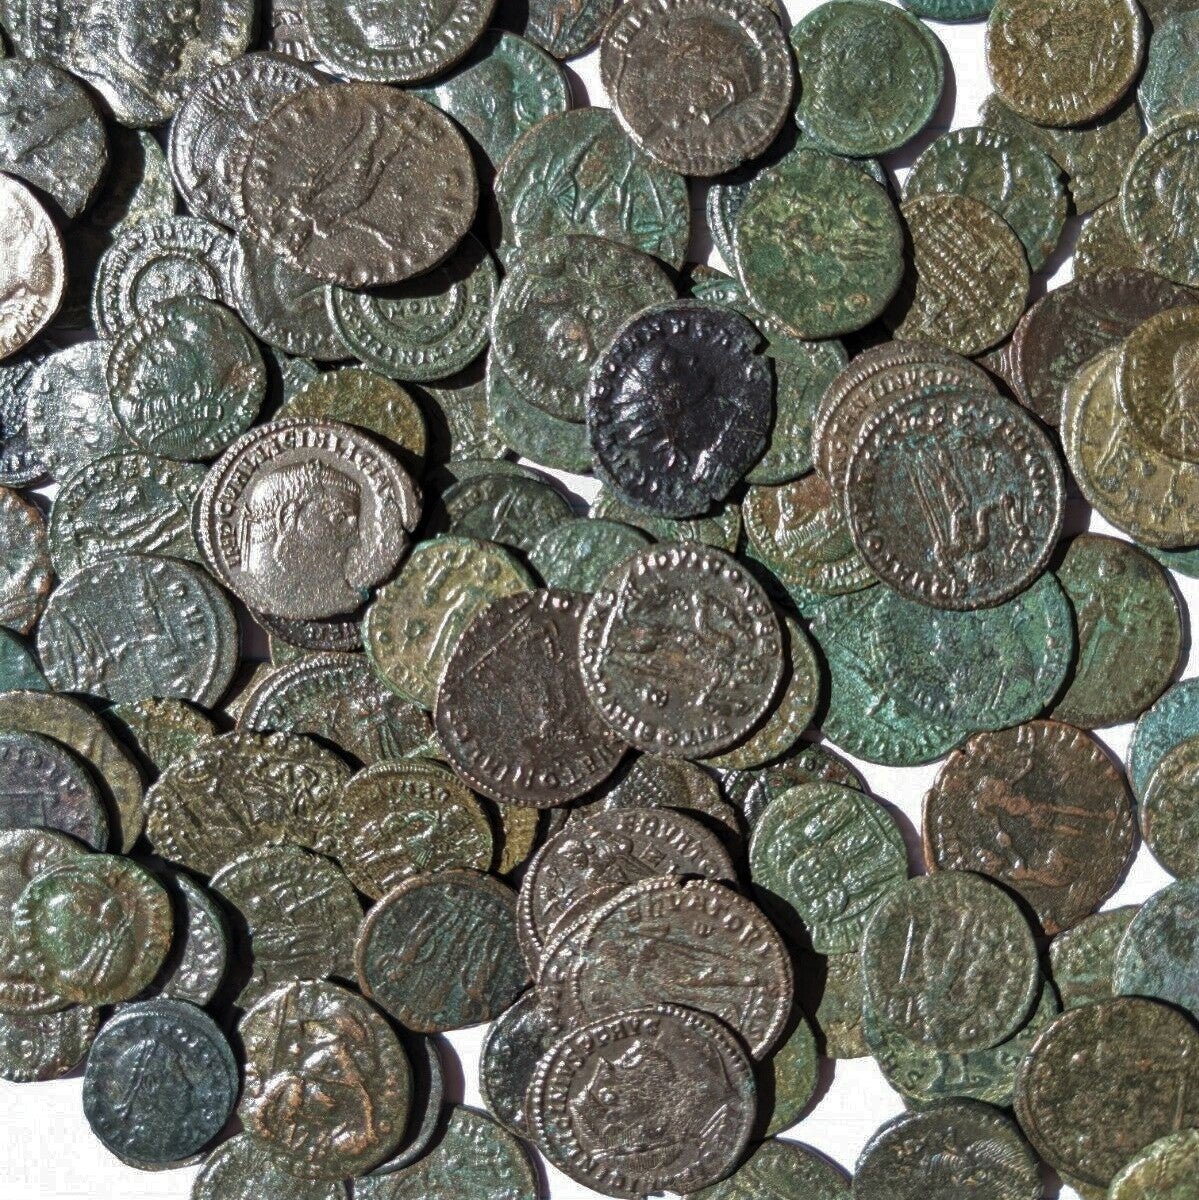 Ancient Roman Bronze Coin - VERY FINE TO EXTREMELY FINE - CLEAN - GENUINE - Premium Ancient Coins - Lot